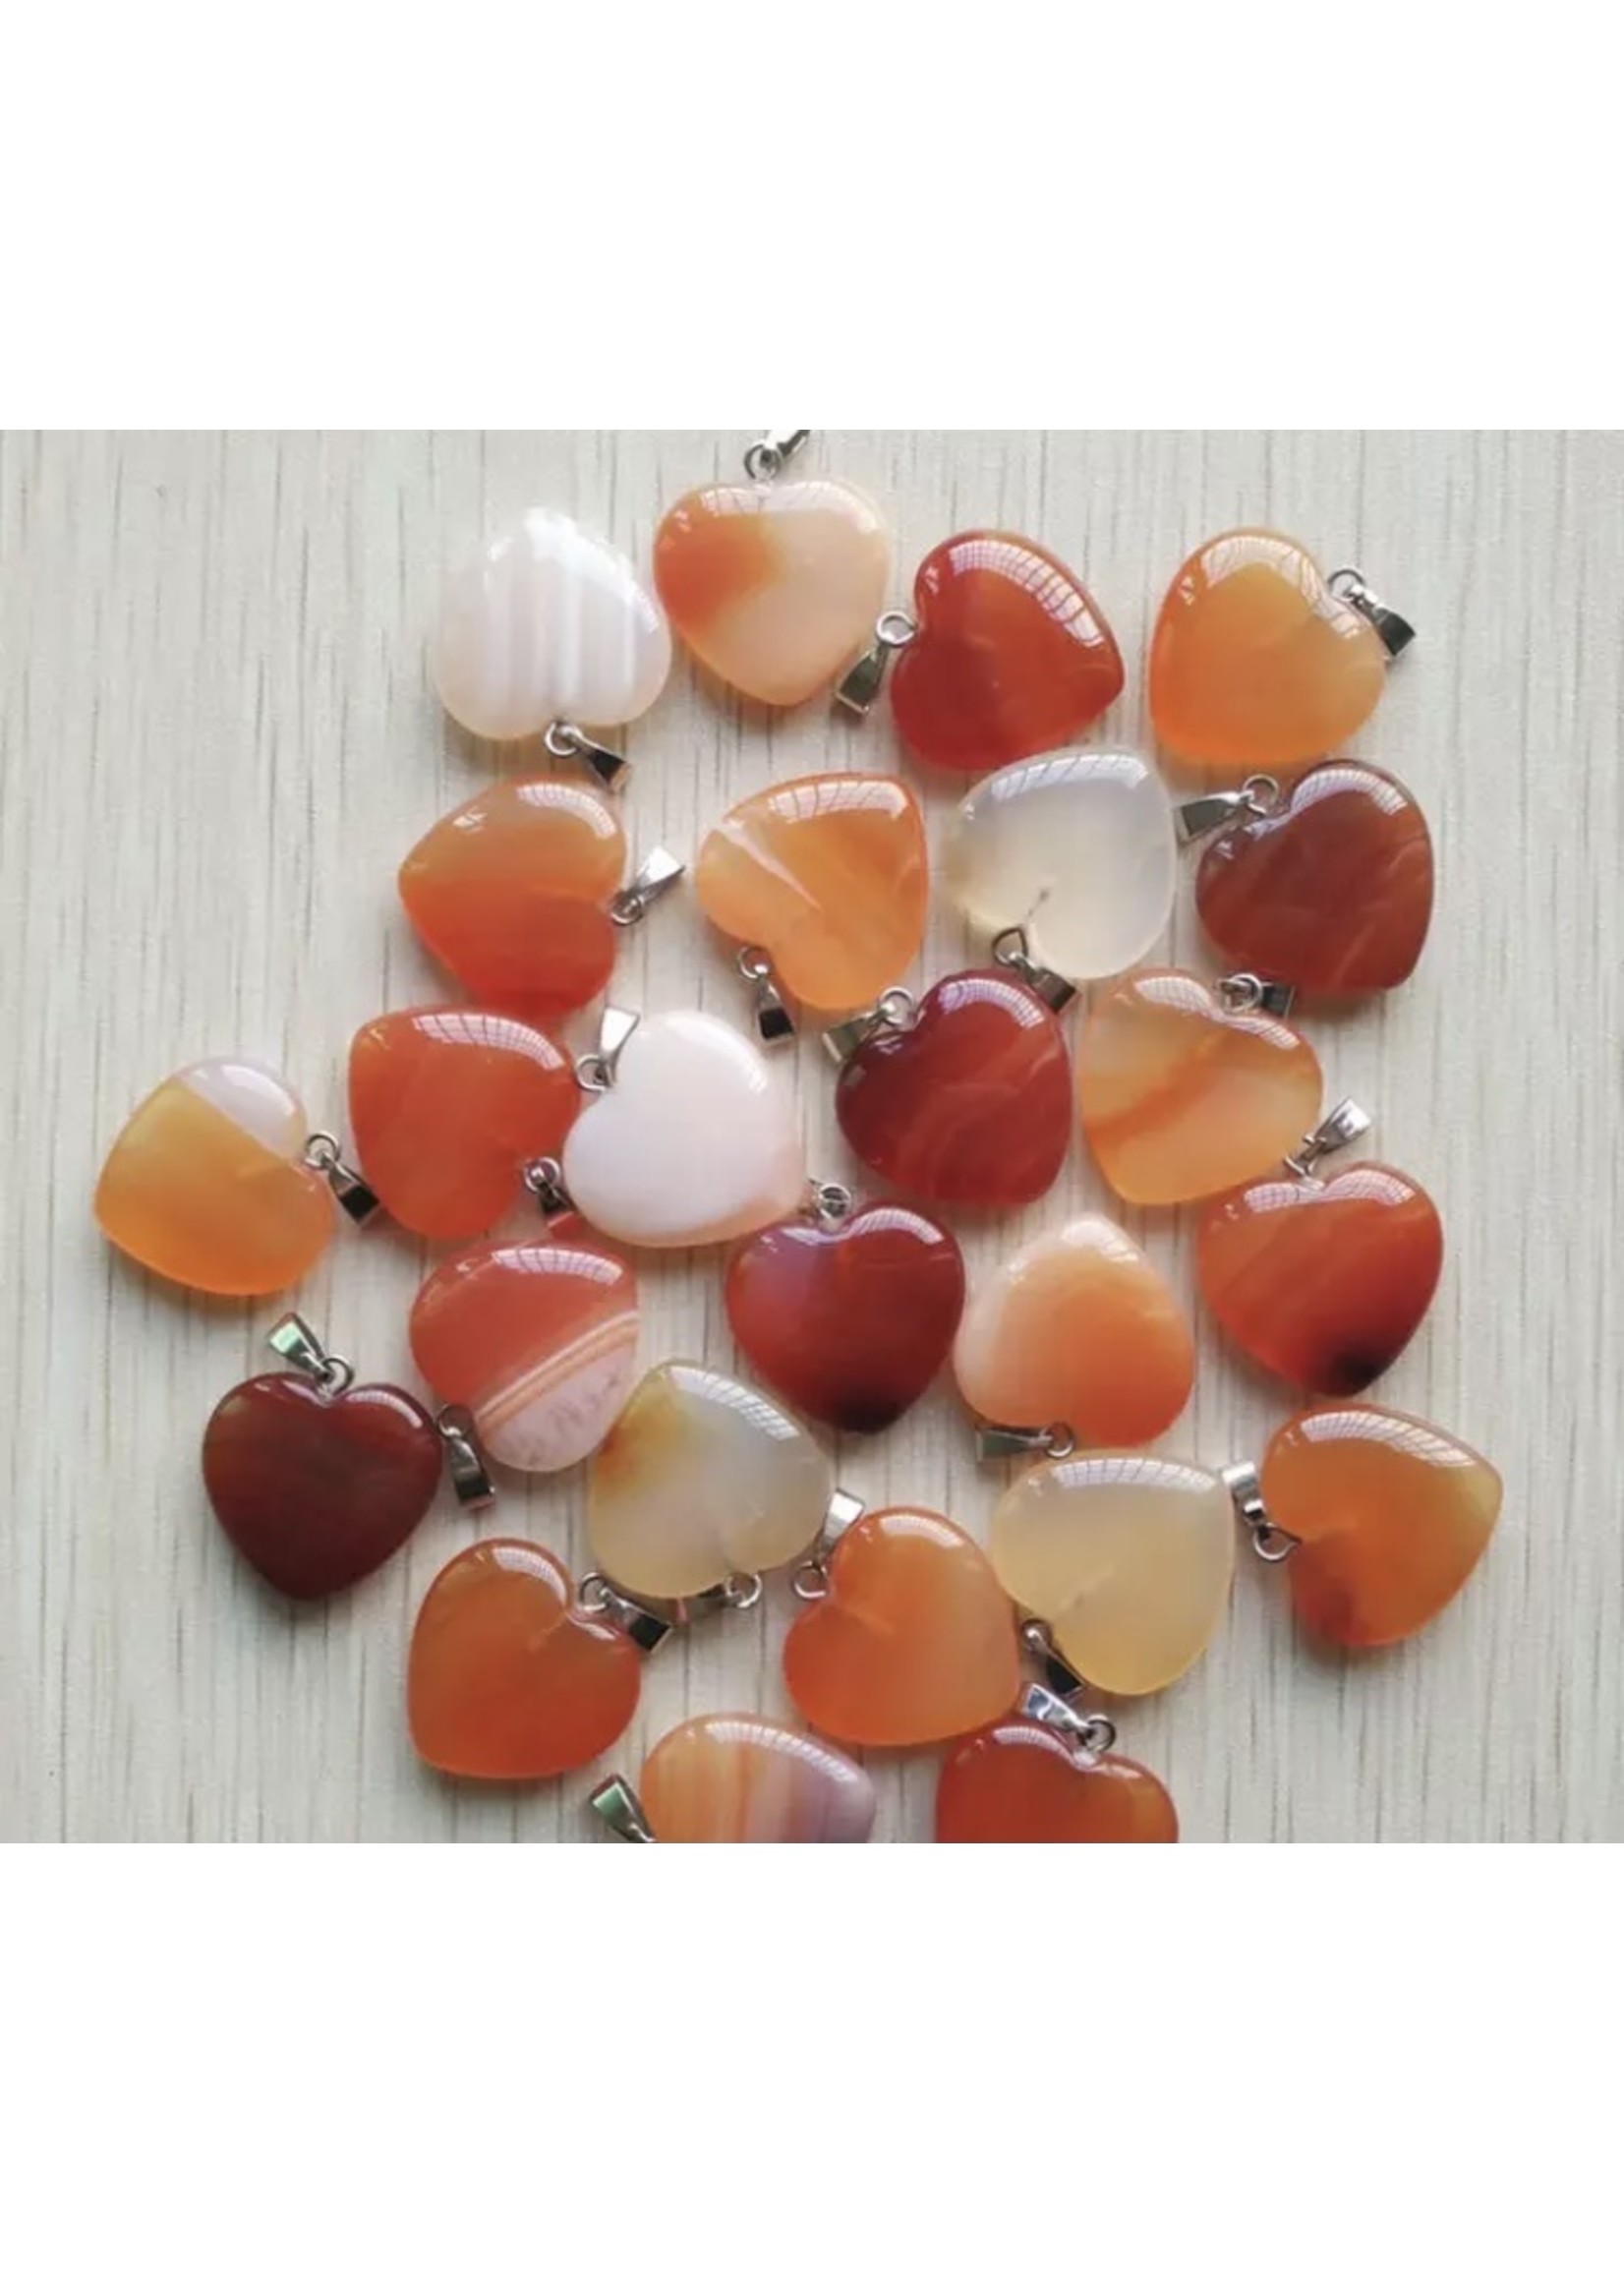 heart necklace stripped agate